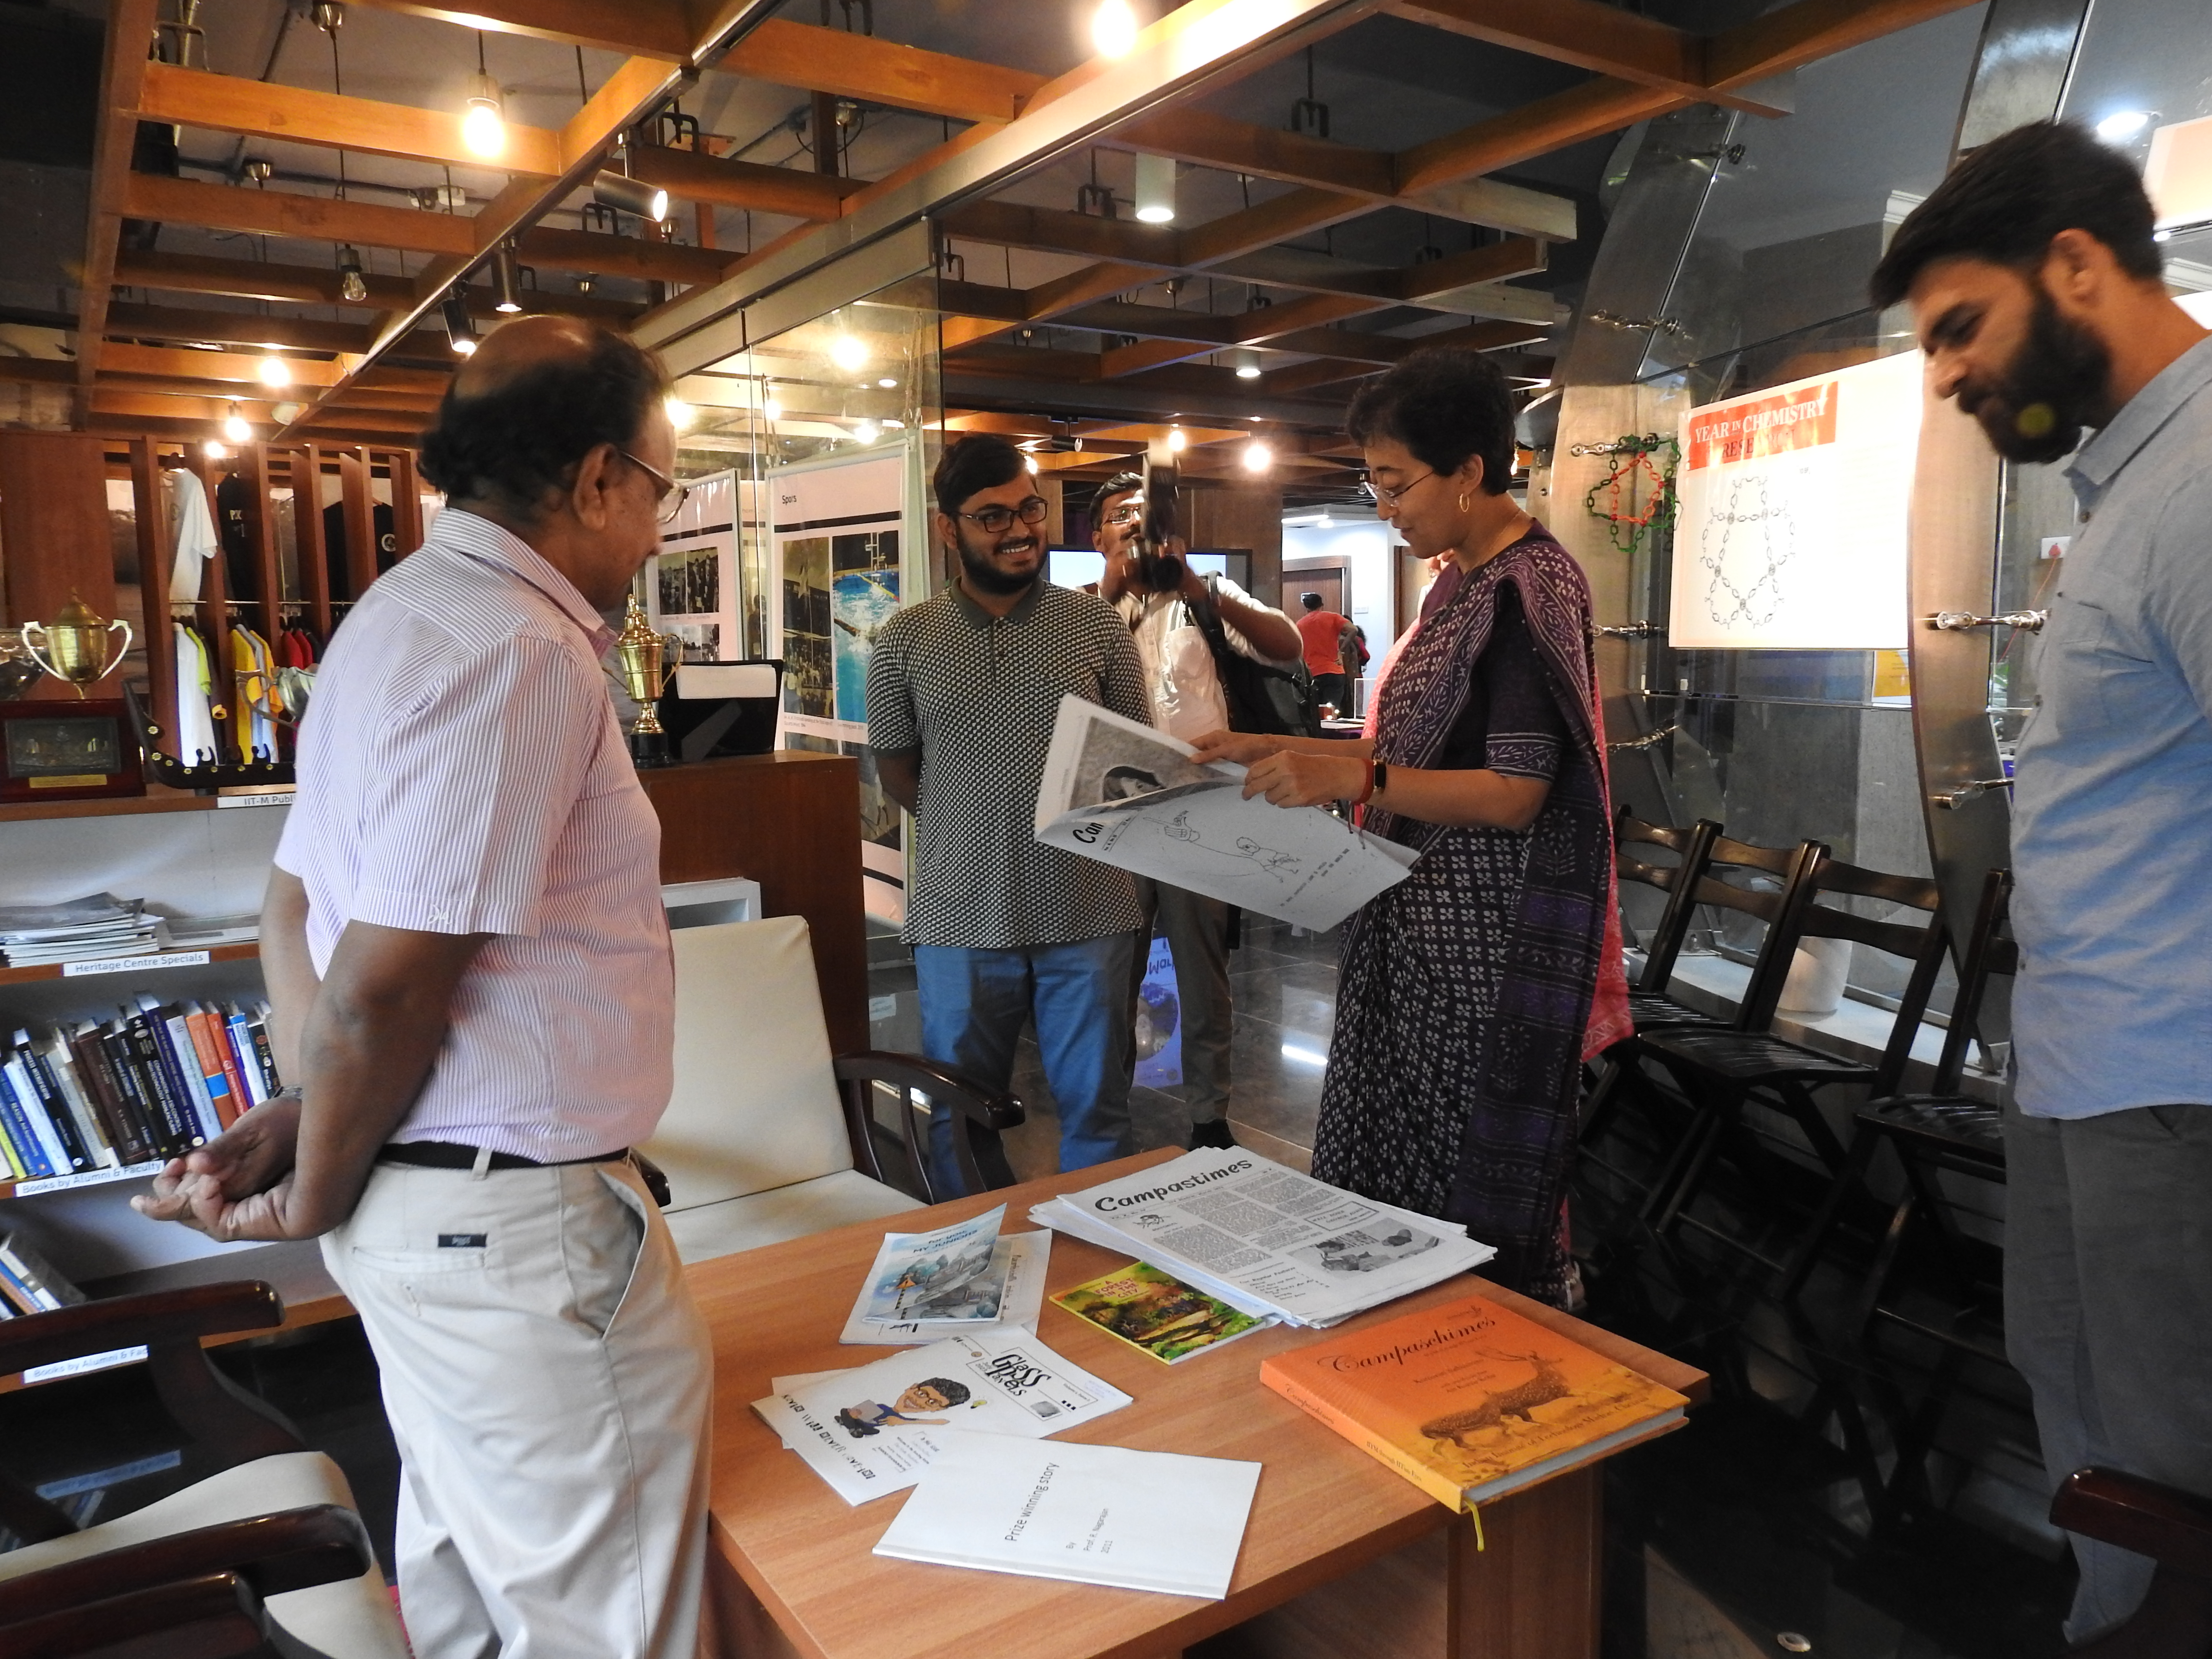 Atishi takes a look at an issue of Campastimes in the Reading Room of the Heritage Centre